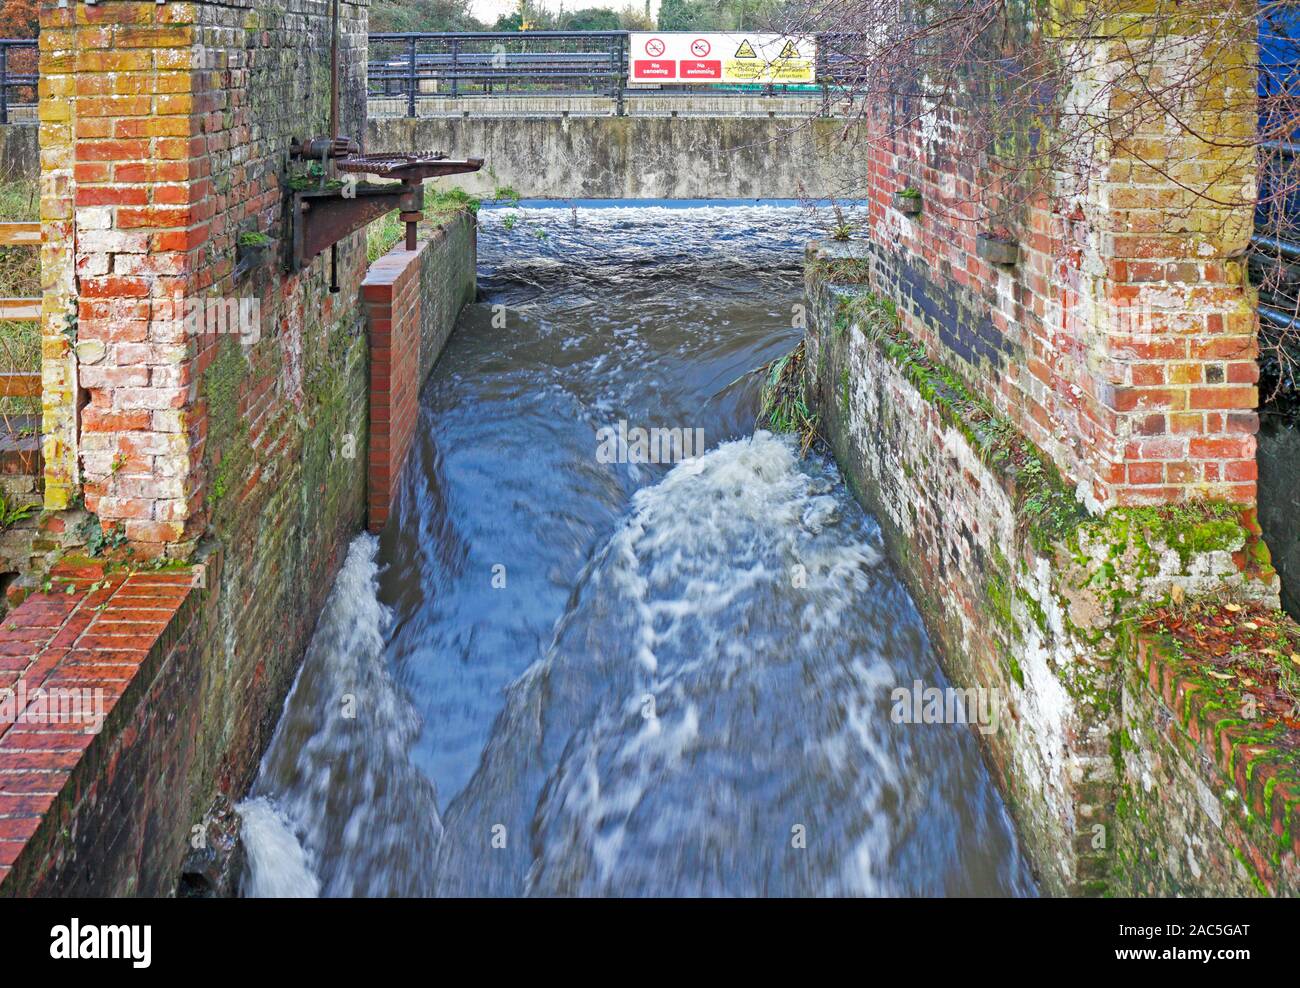 The River Bure flowing through the remains of the lower section of the old watermill at Horstead, Norfolk, England, United Kingdom, Europe. Stock Photo